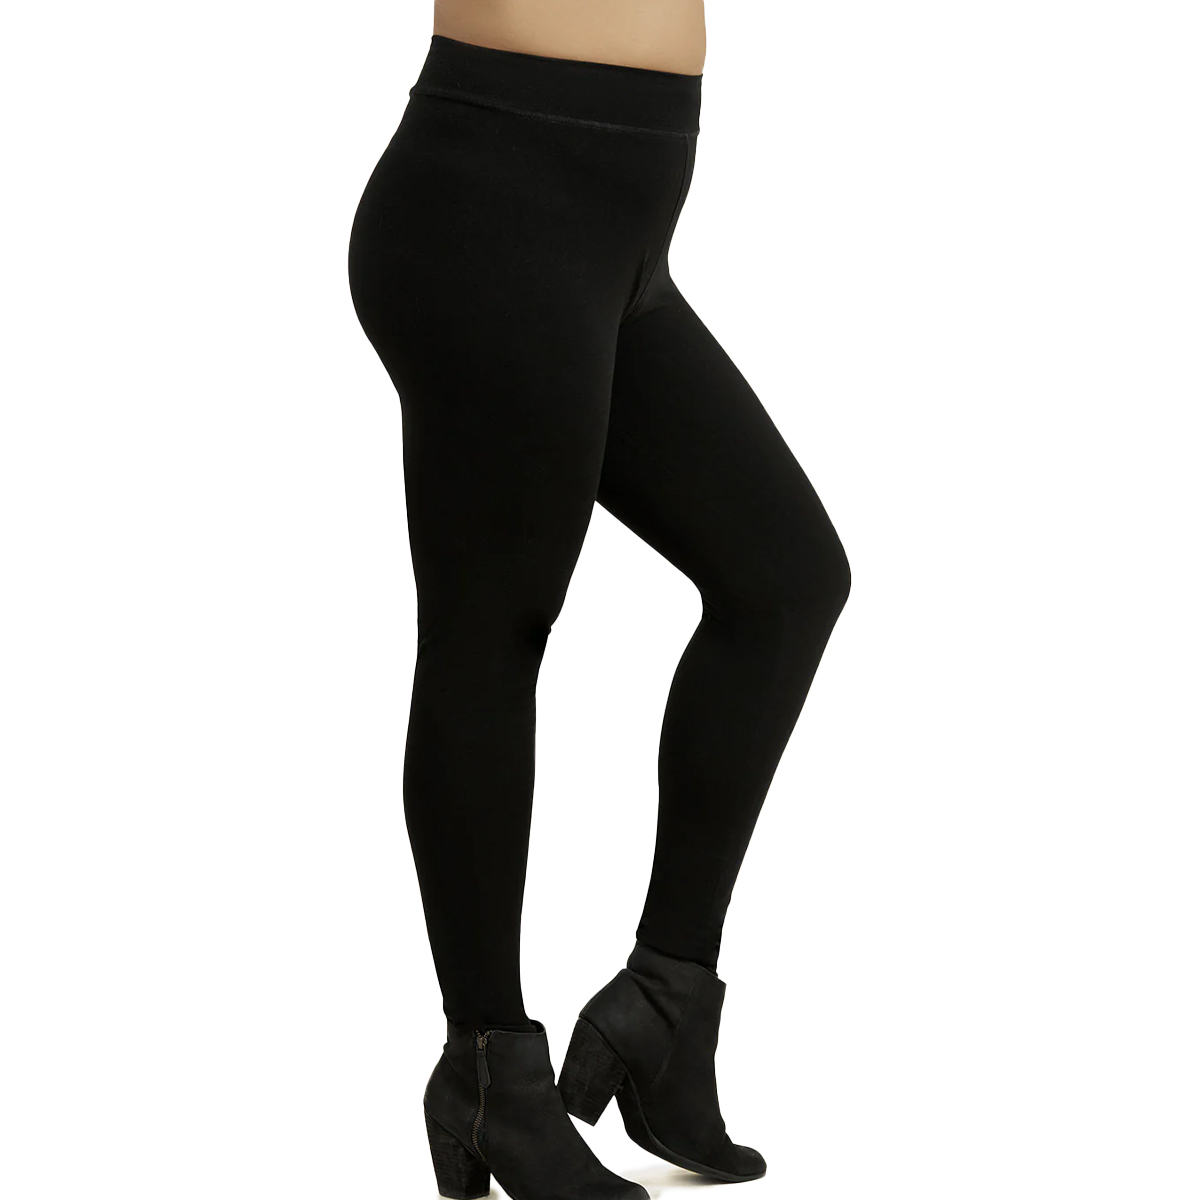 3xl Size Leggings - Get Best Price from Manufacturers & Suppliers